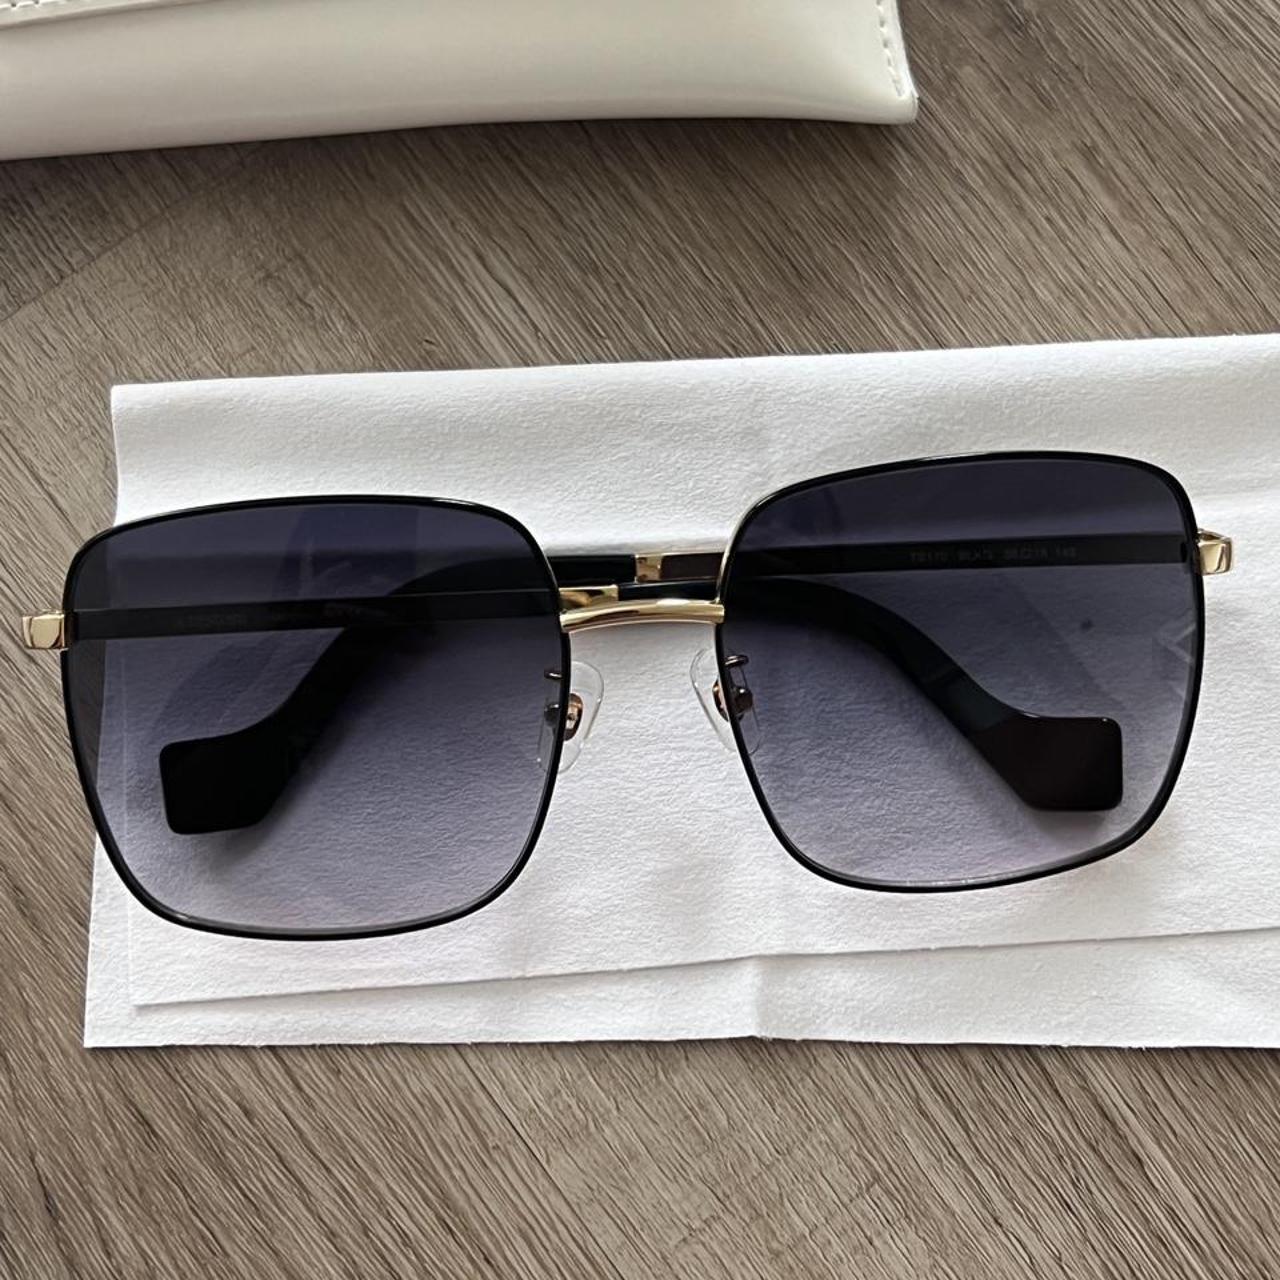 VEDI VERO sunglasses with beautiful gold details and... - Depop